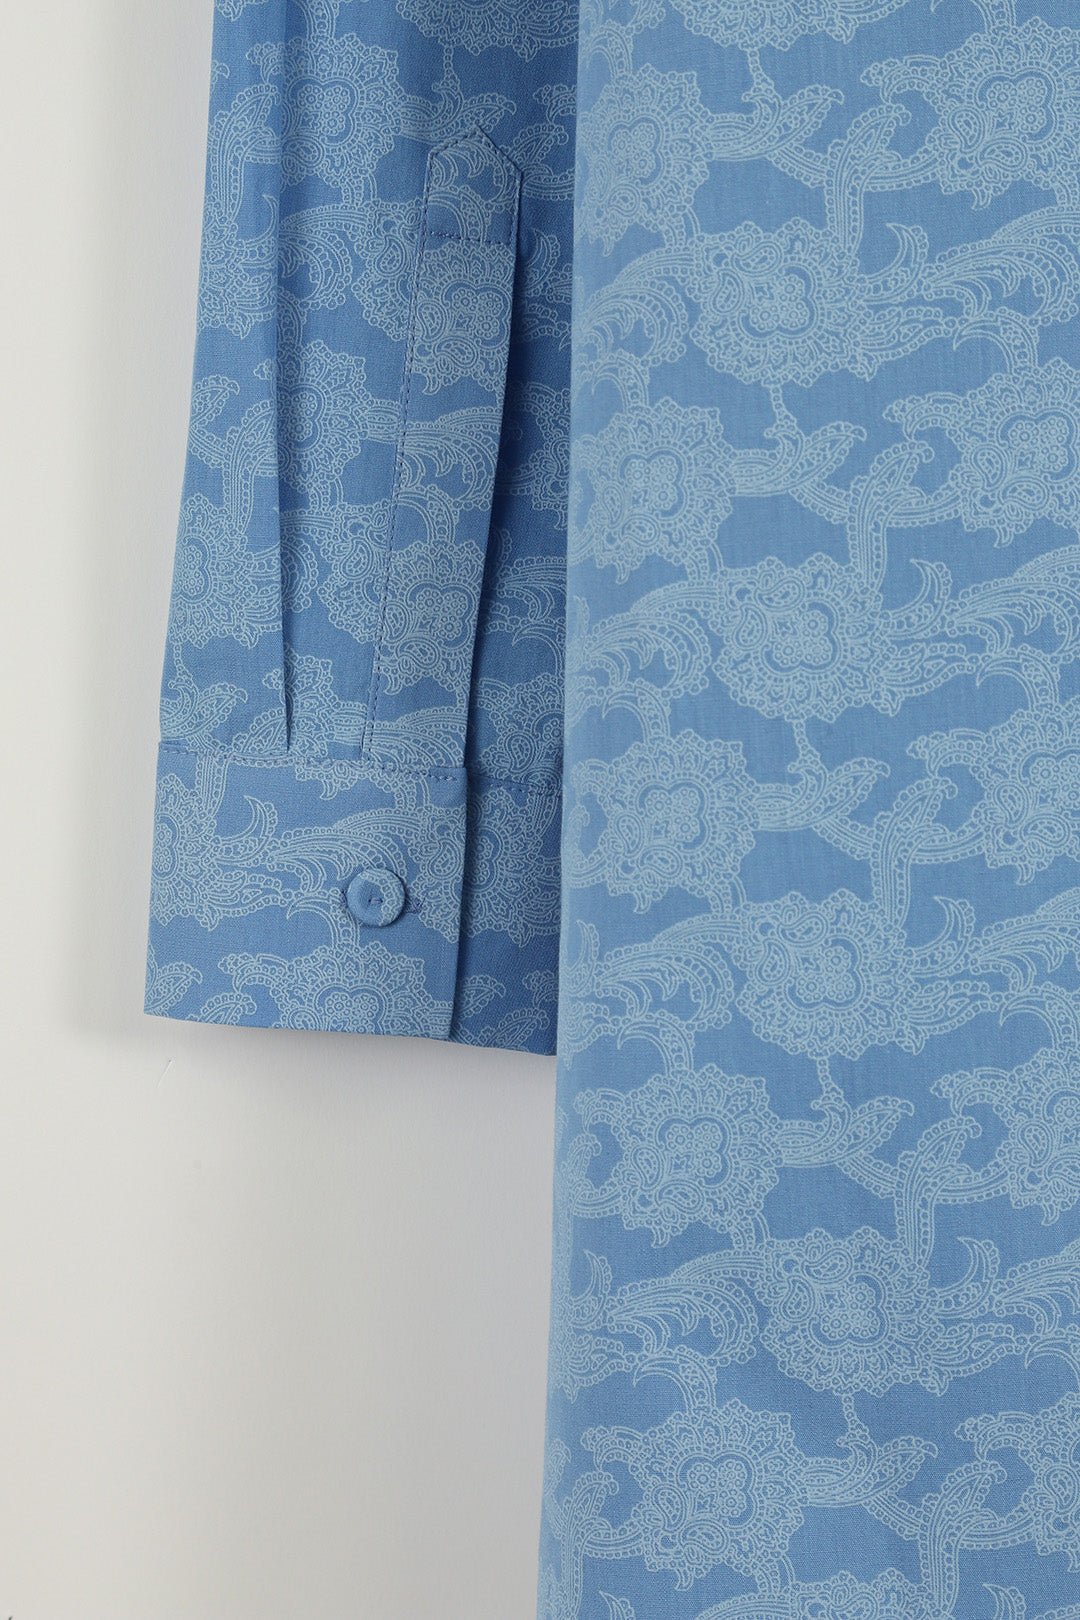 SELLA ITALIAN COTTON SHIRT IN SKY PAINTING BLUE - Jarbo